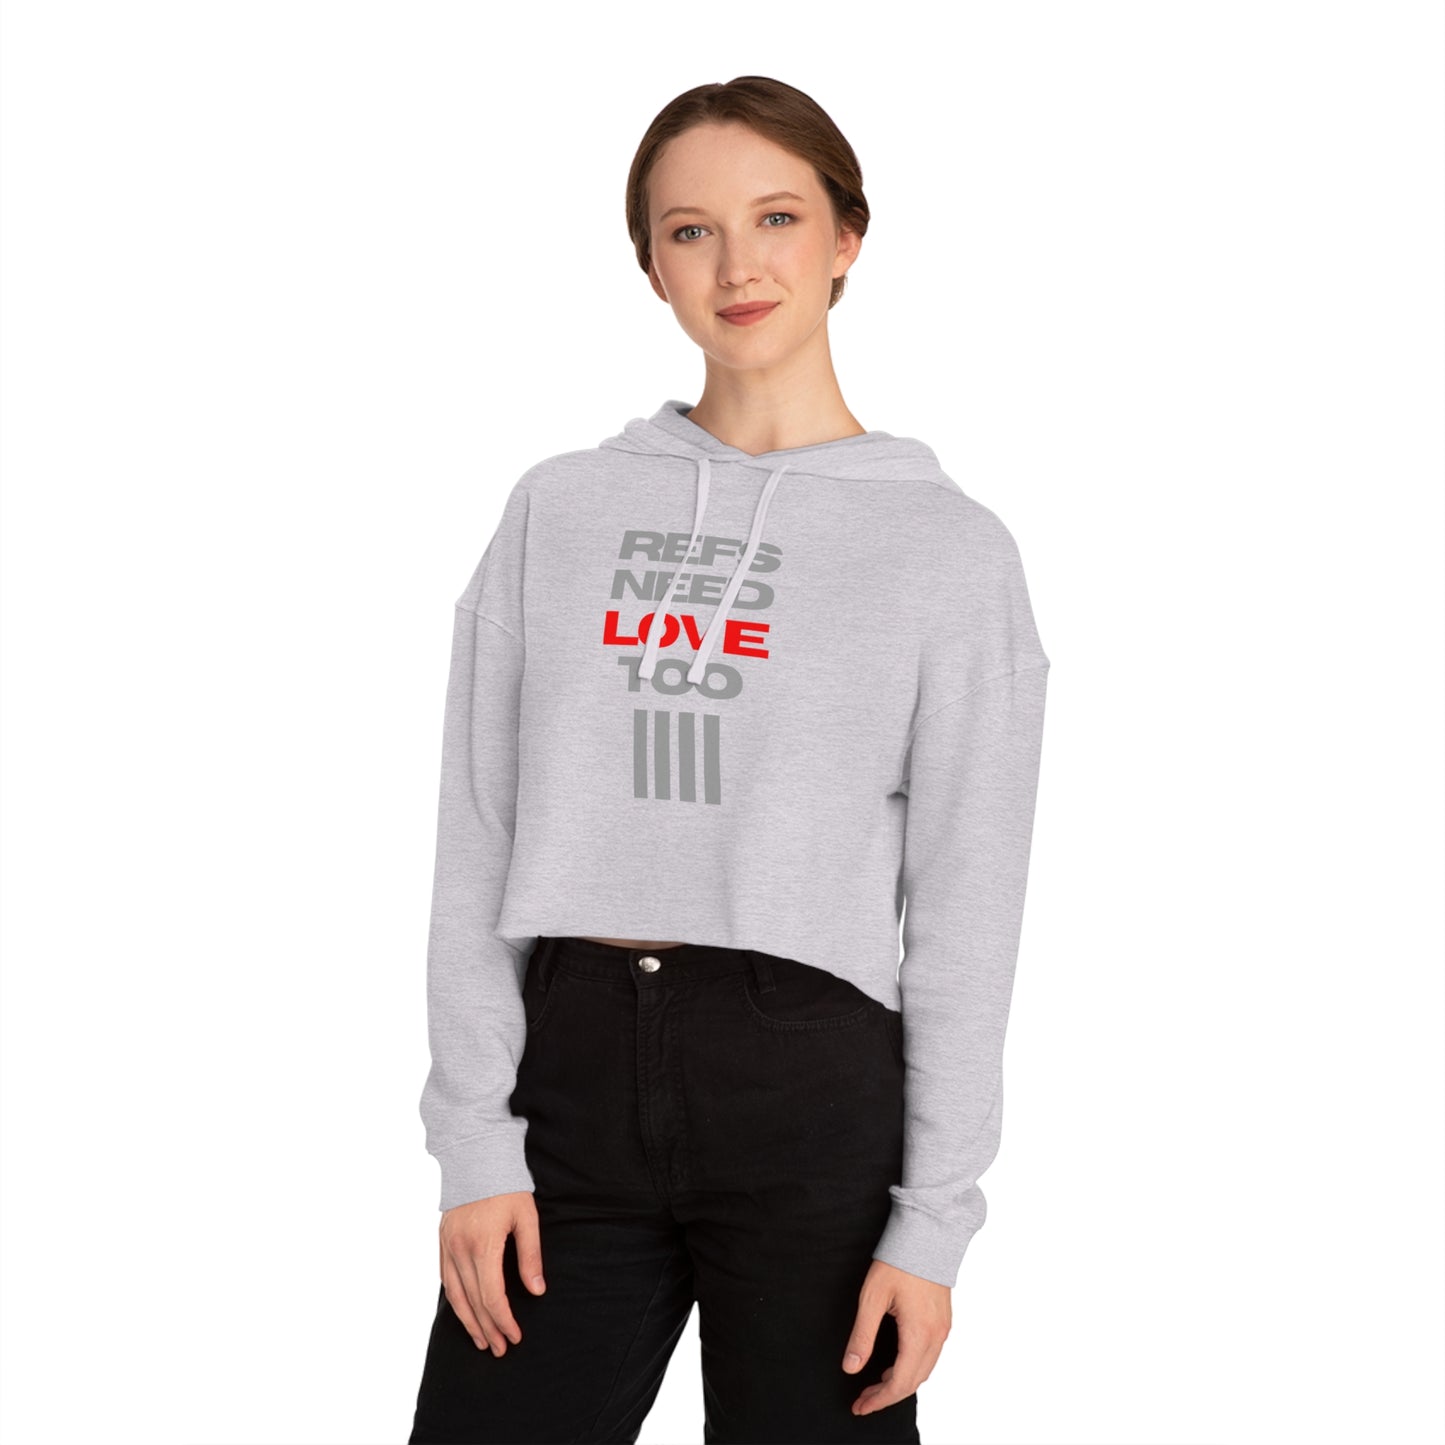 Refs Need Love Too Women's Cropped Hooded Sweatshirt | For Mom Refs | For women sports officials |